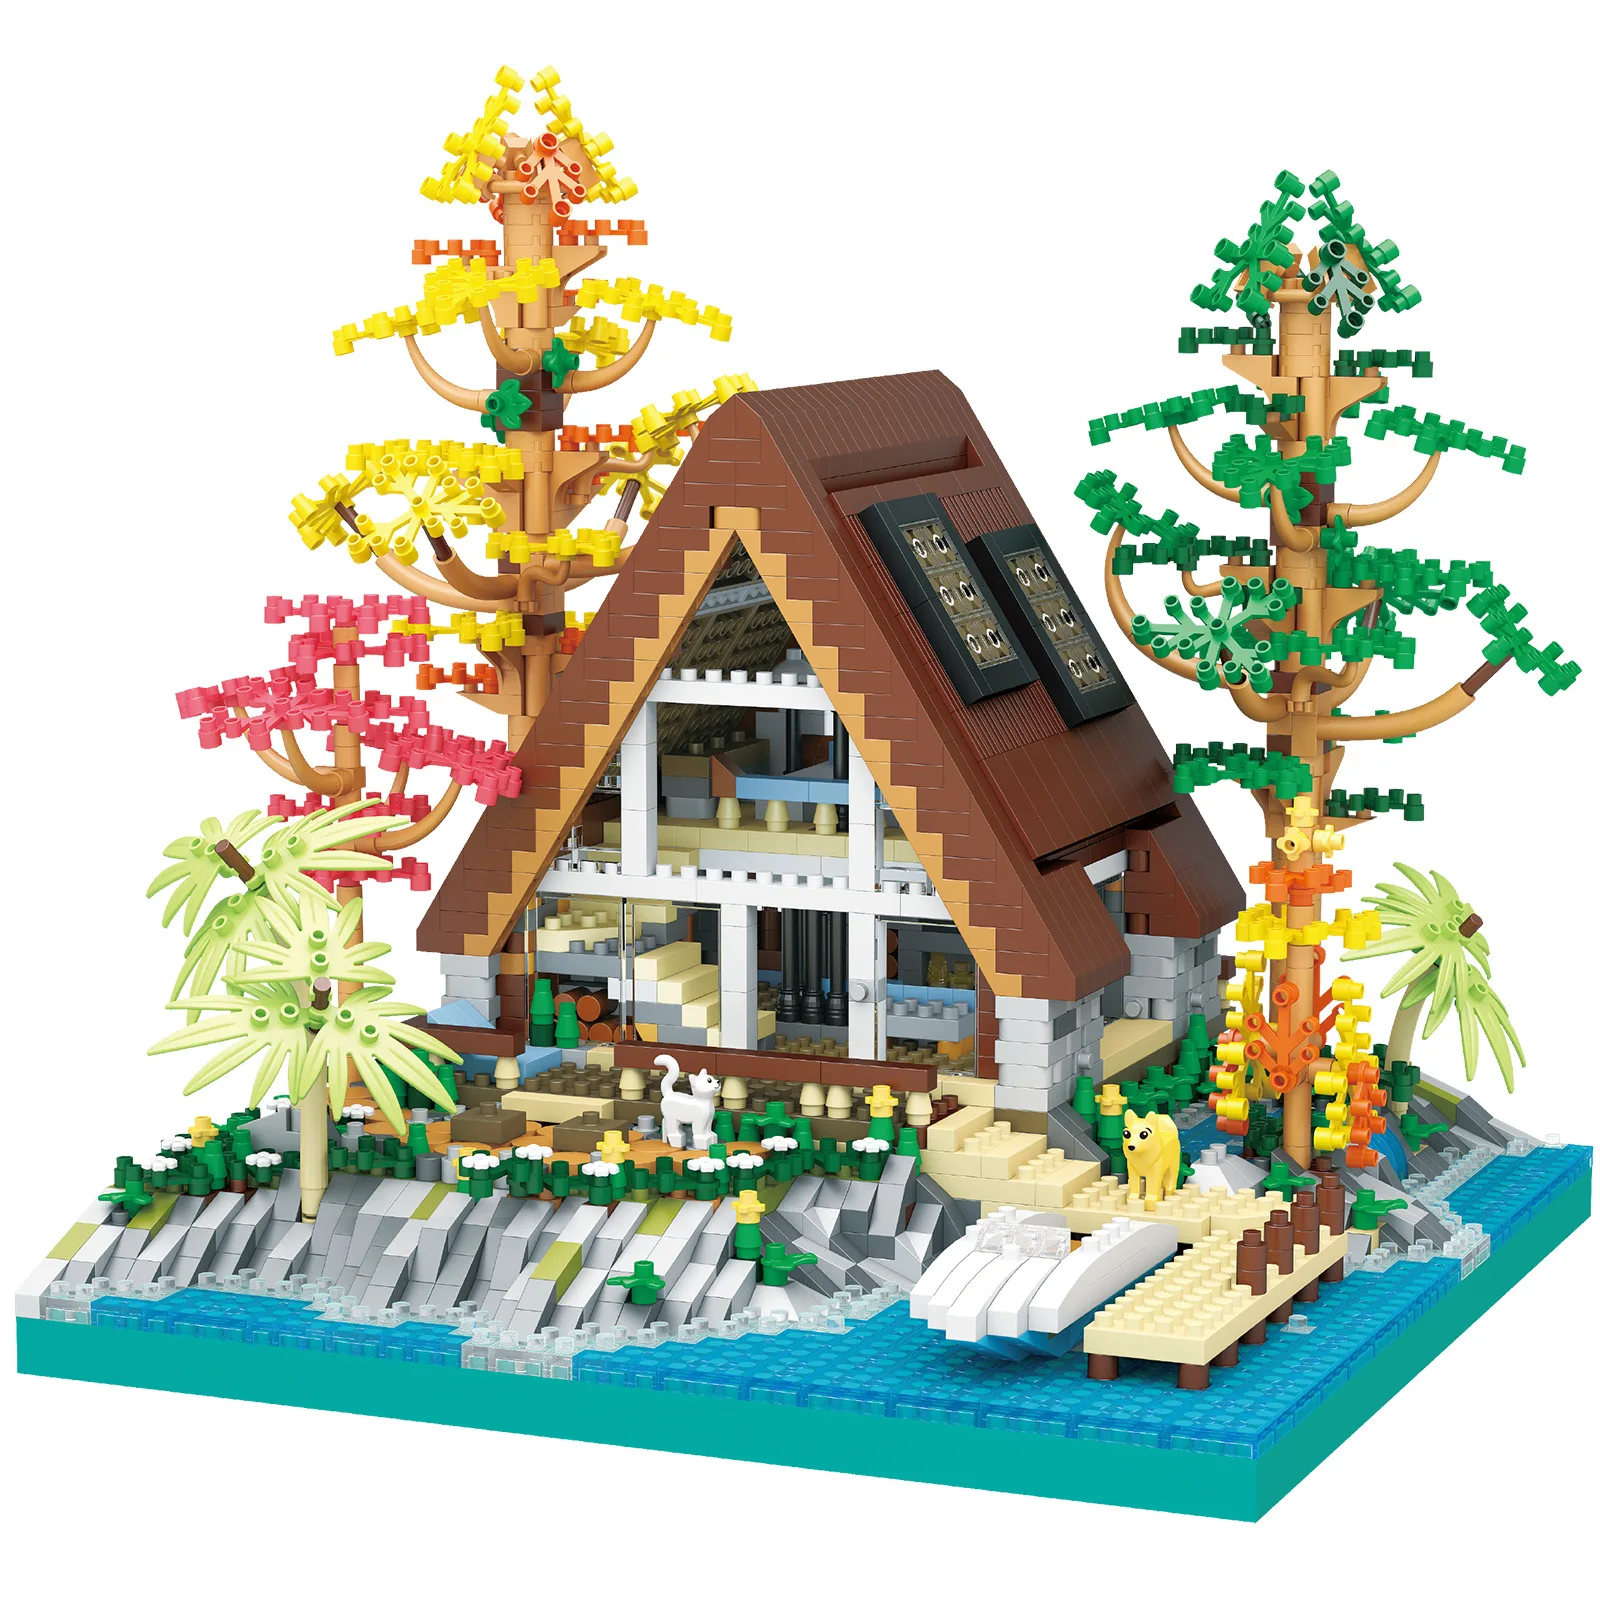 Creative City Street View House Micro Diamond Block Lakeside Cabin Streetscape Model Building Brick Figures Toy For Kids Gifts educational brick mini model toy building blocks micro particles pet dog husky children s gift block diamond toys gifts